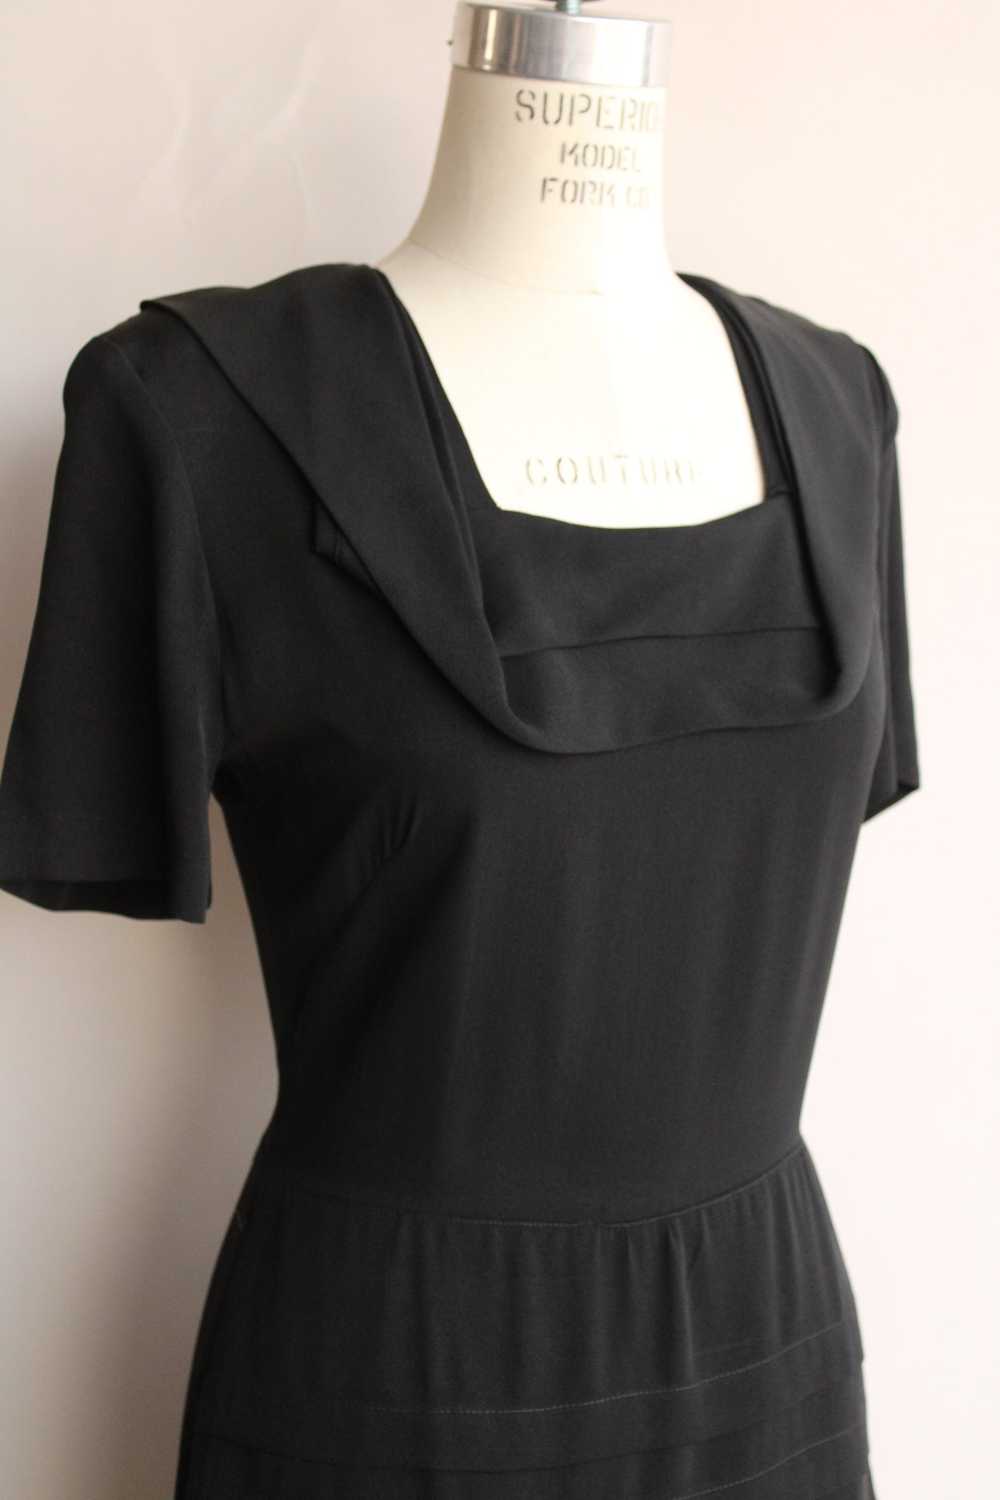 Vintage 1940s Black Rayon Dress With Square Shawl… - image 4